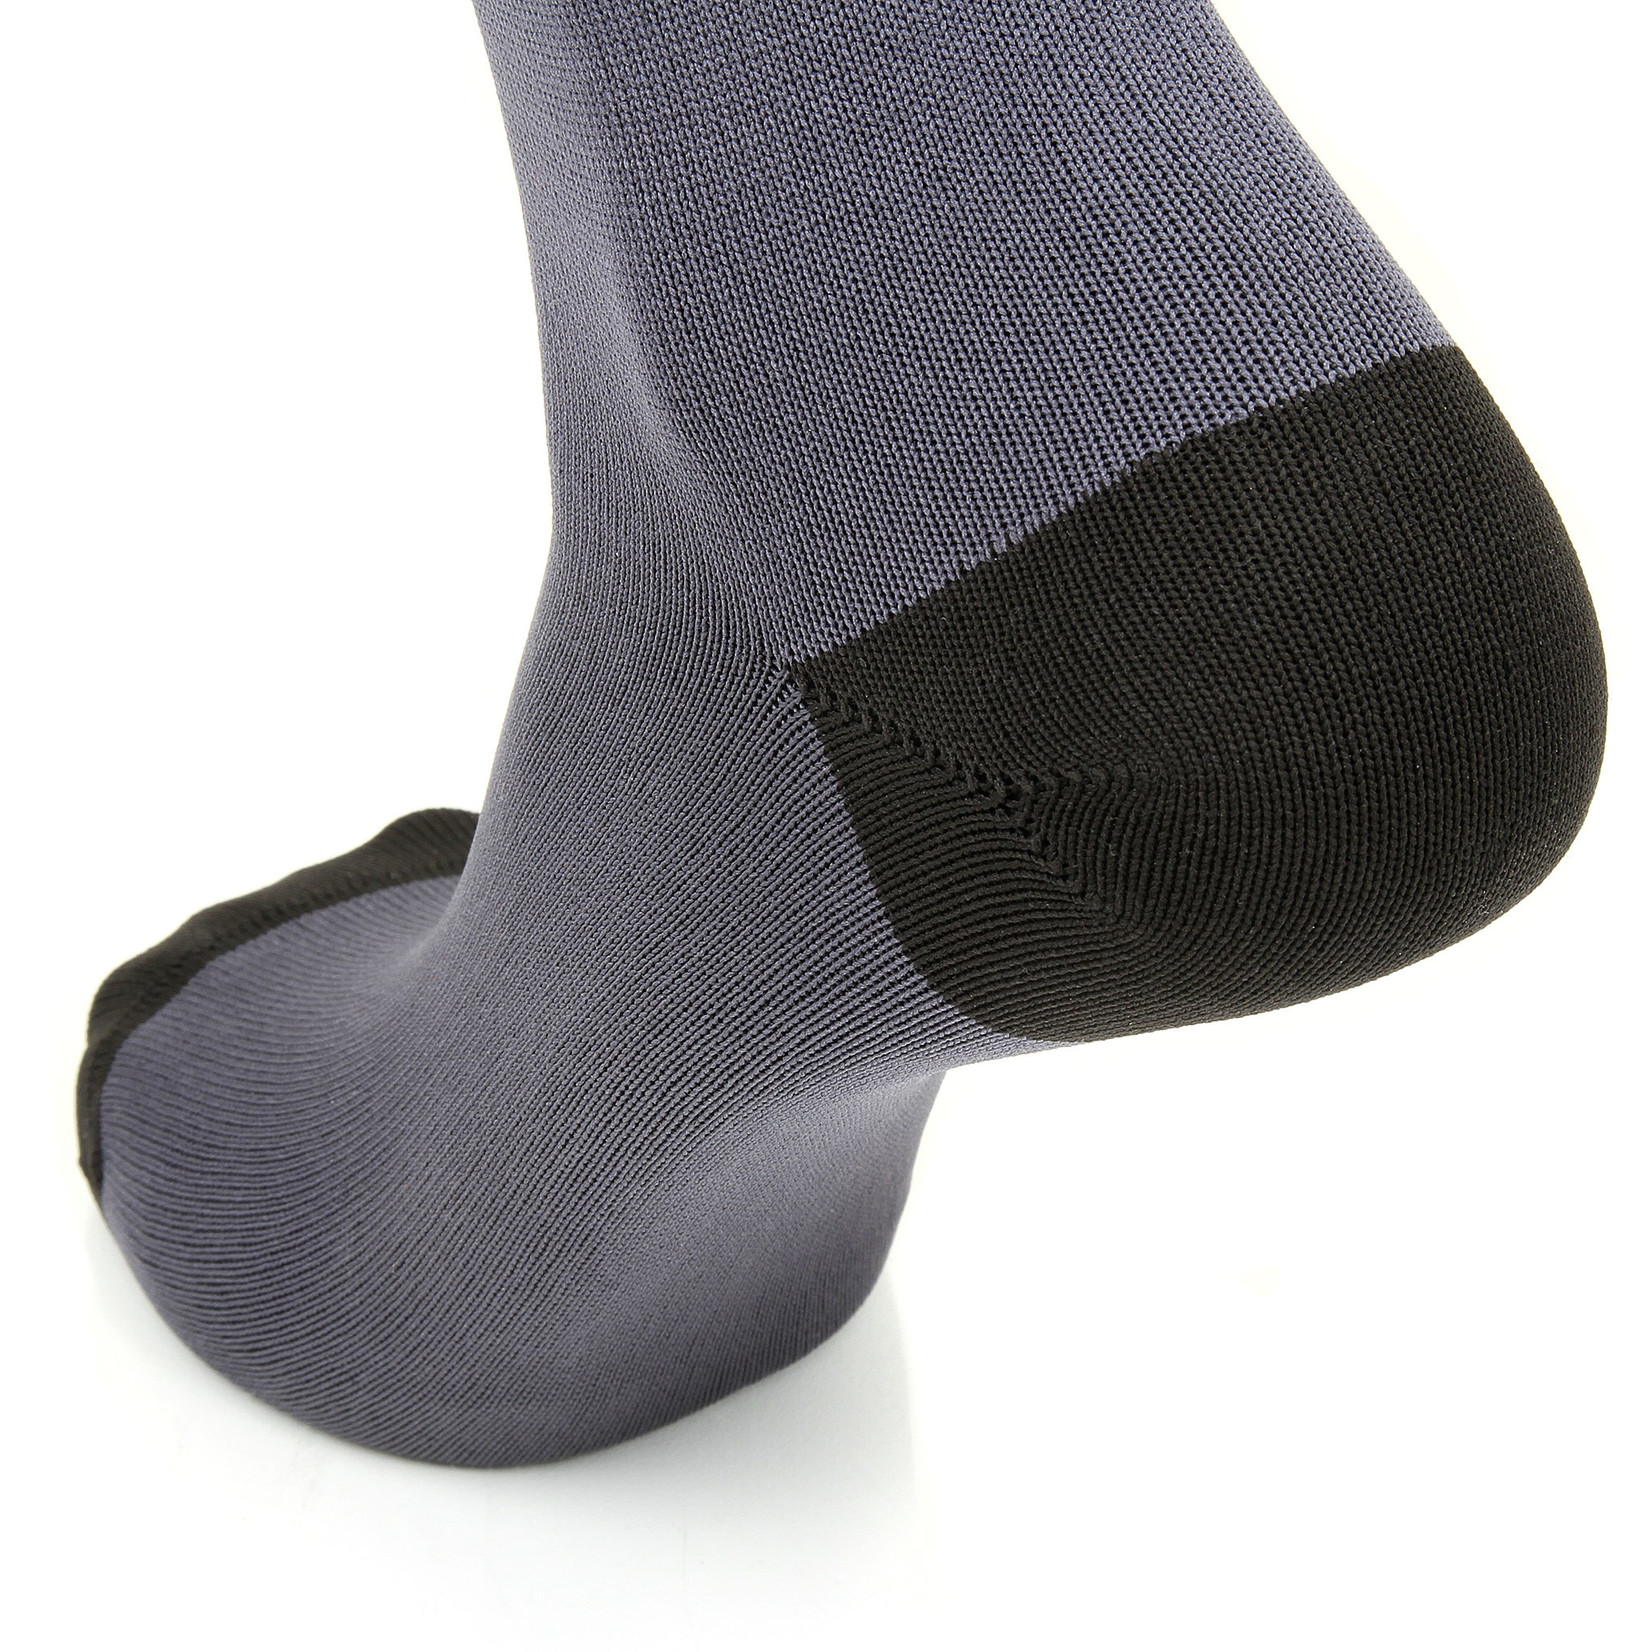 Howies Skate Sock - Thin Fit